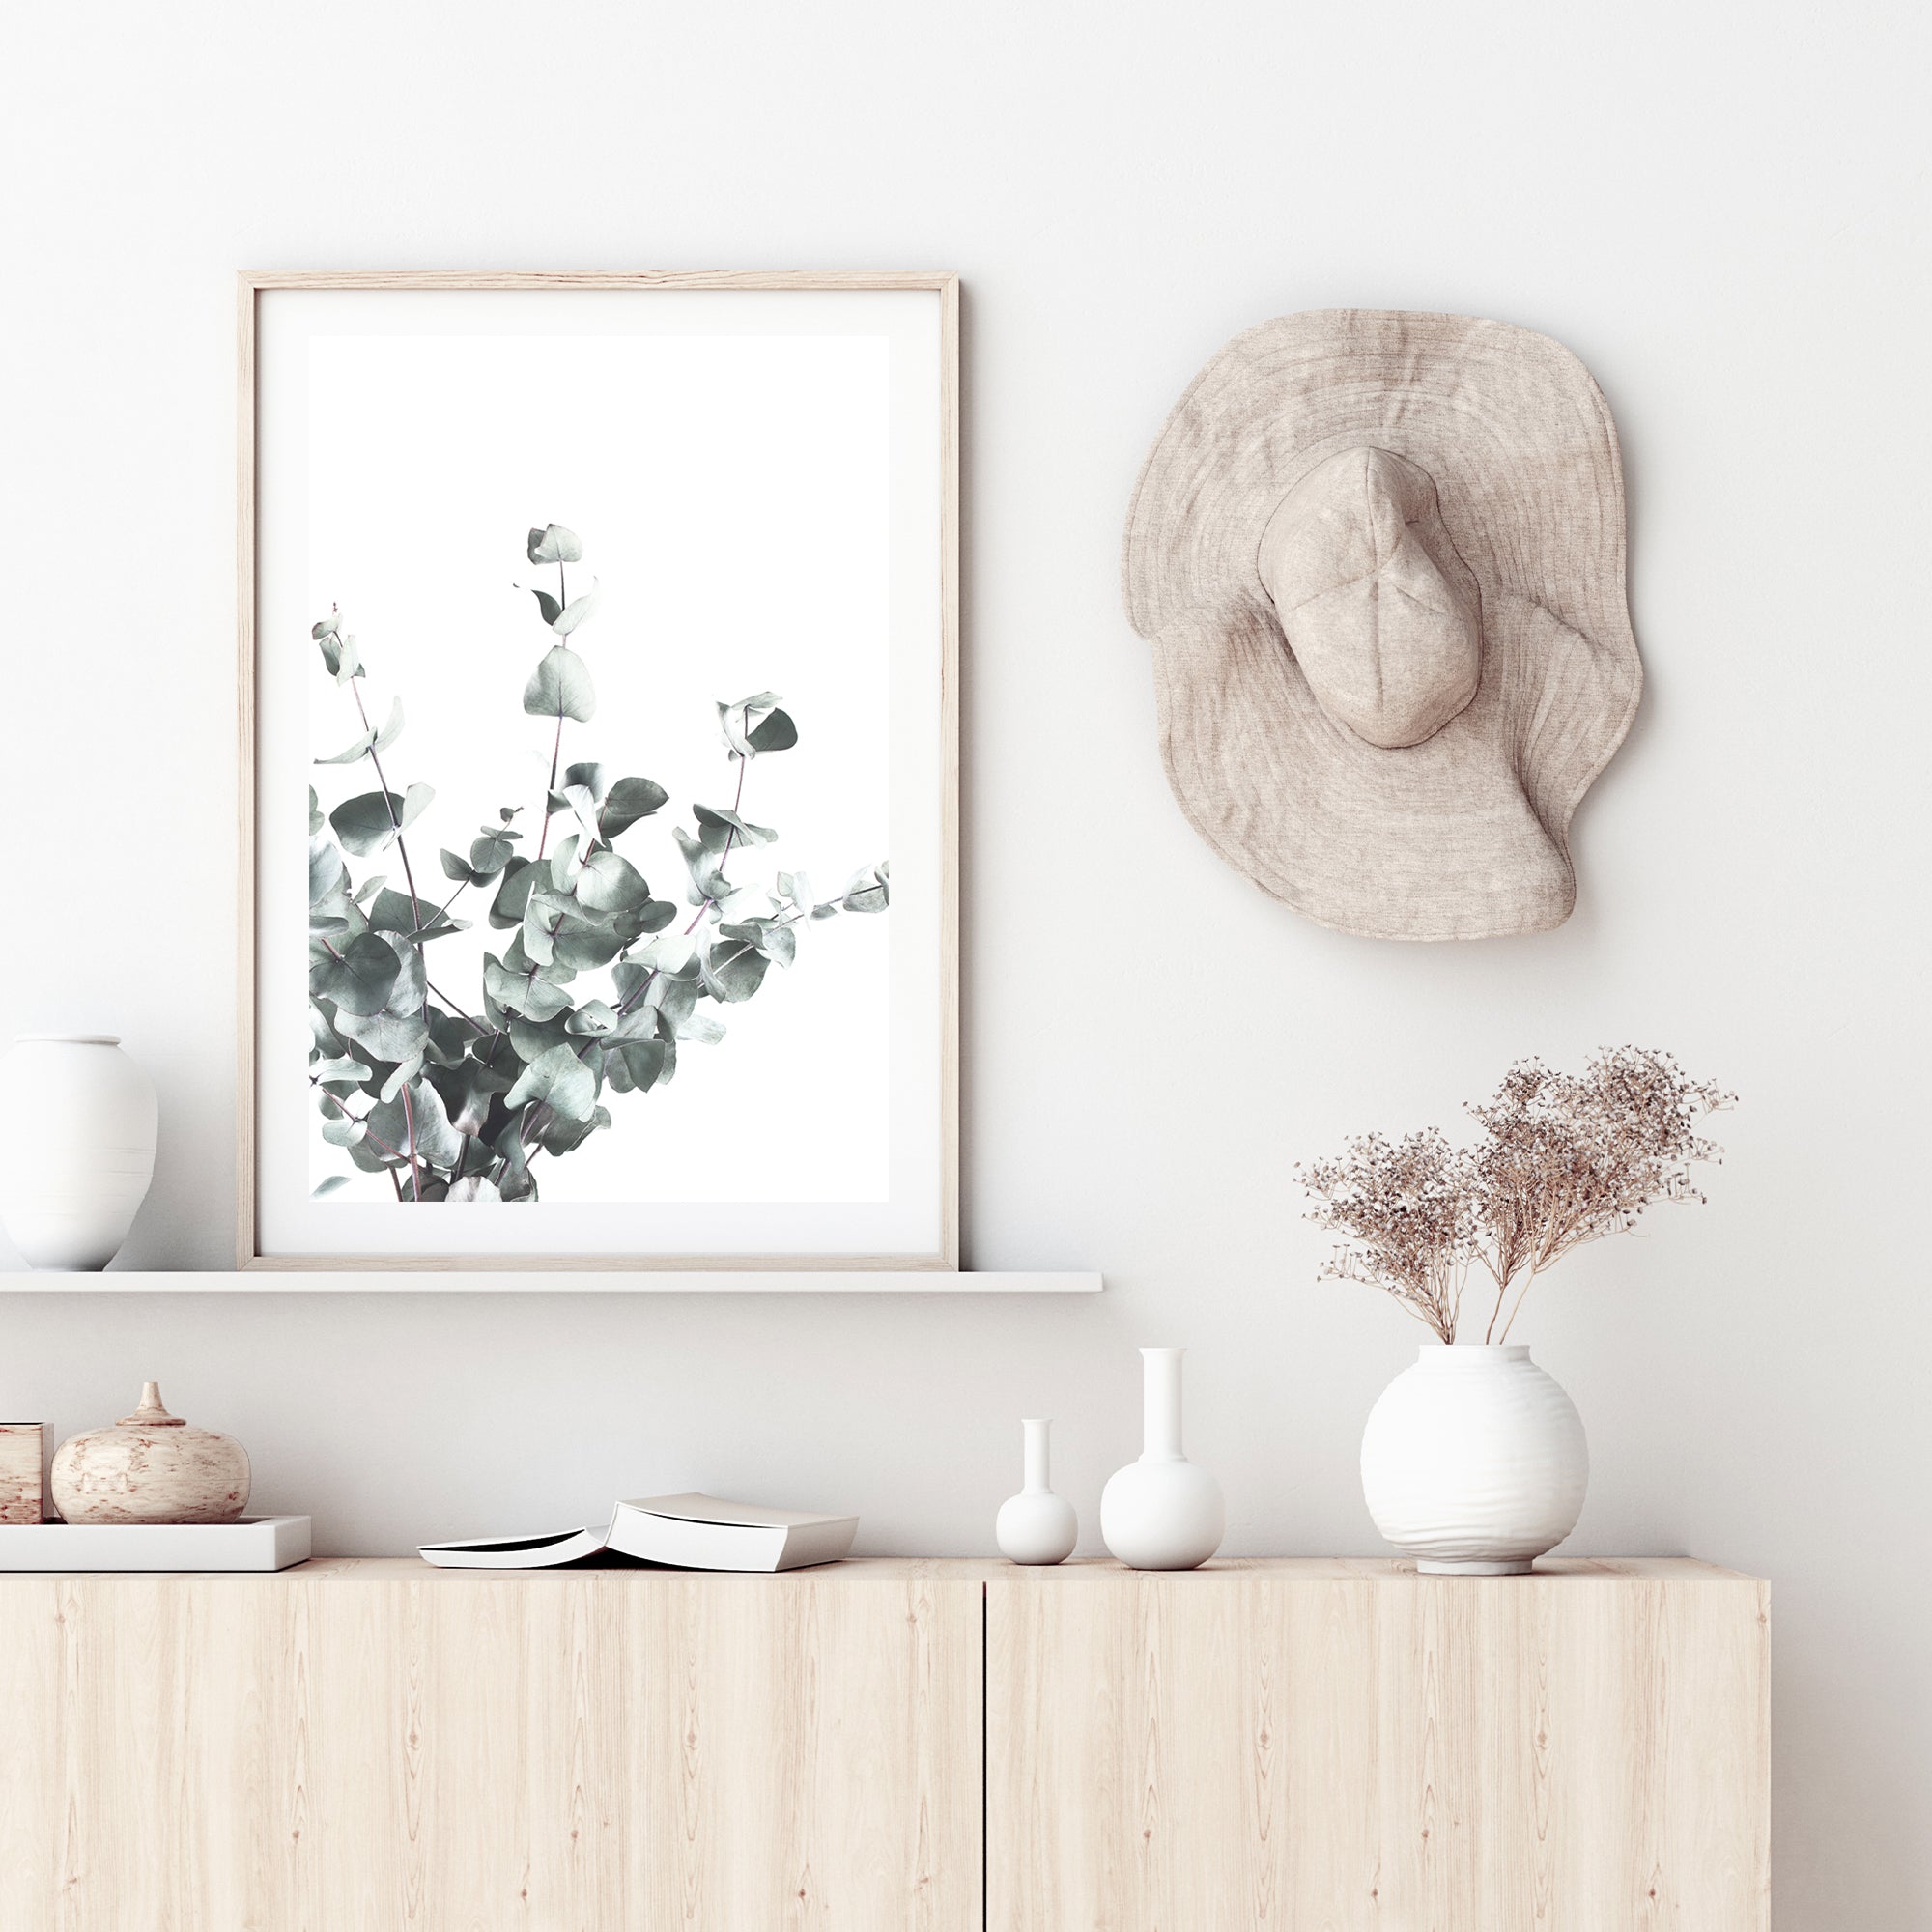 A framed or unframed artwork of eucalyptus leaves (A)with a neutral background available as a canvas or photo print.